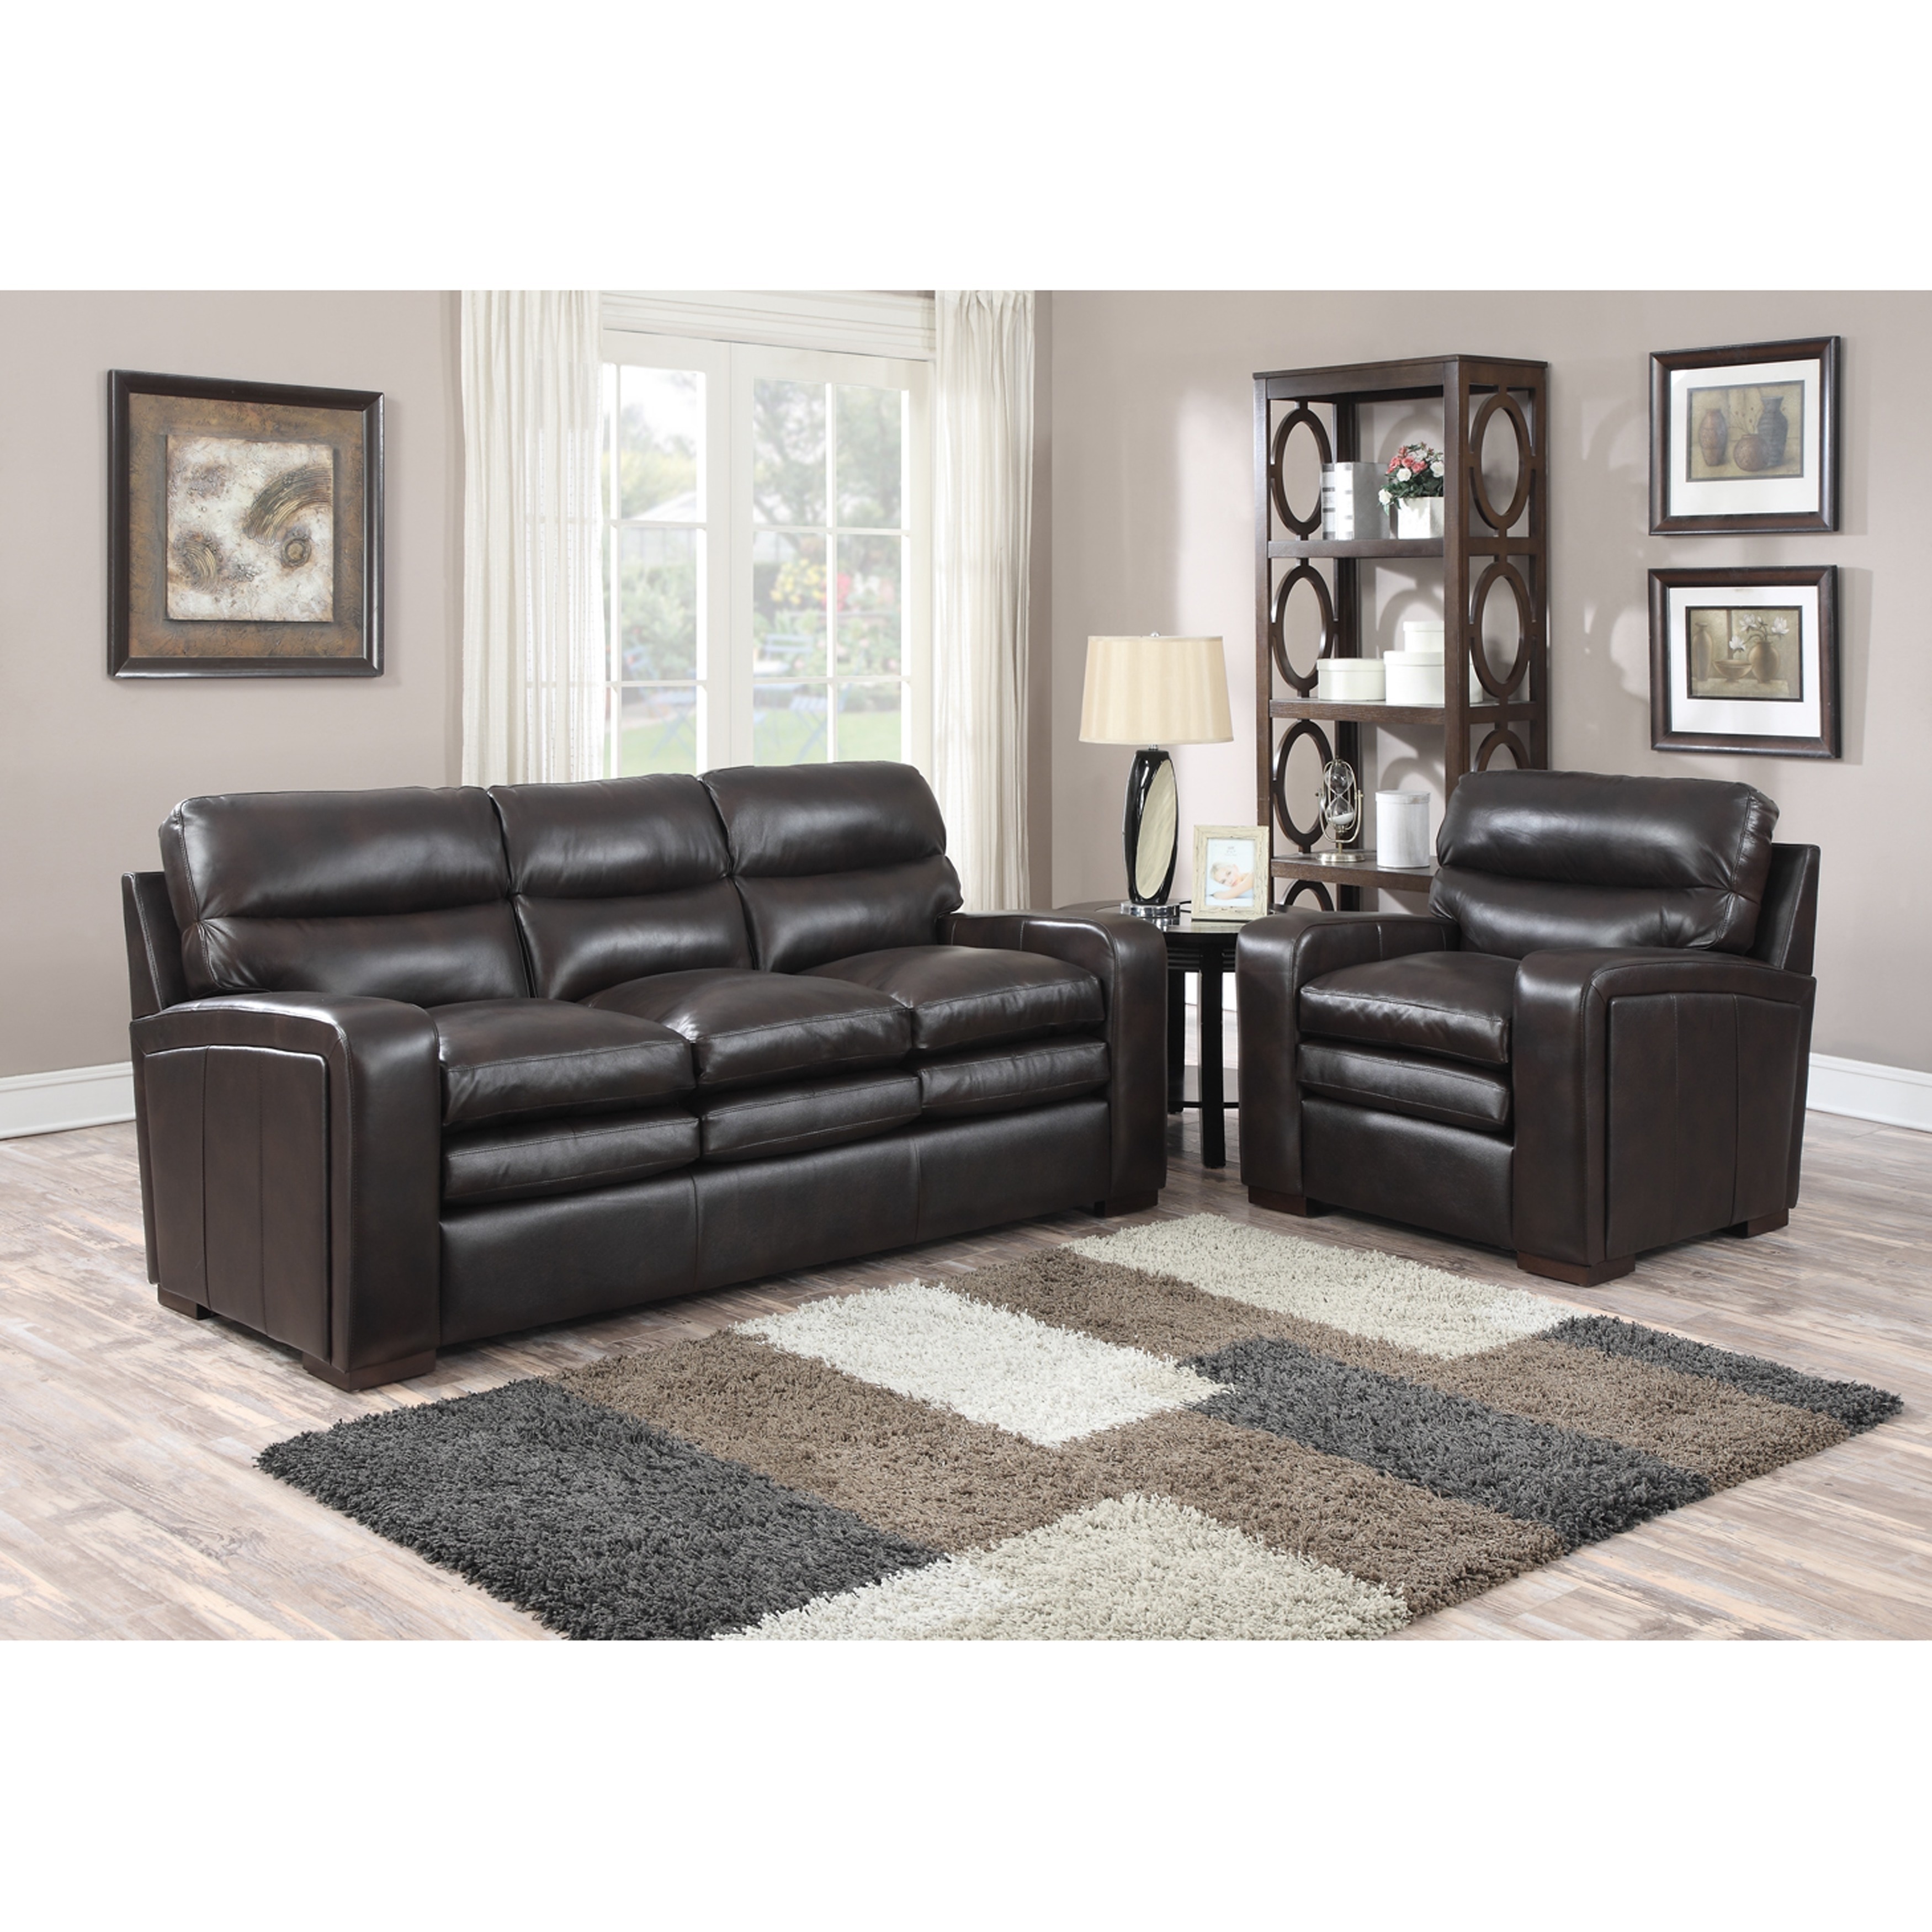 Mercer Dark Brown Italian Leather Sofa And Leather Chair